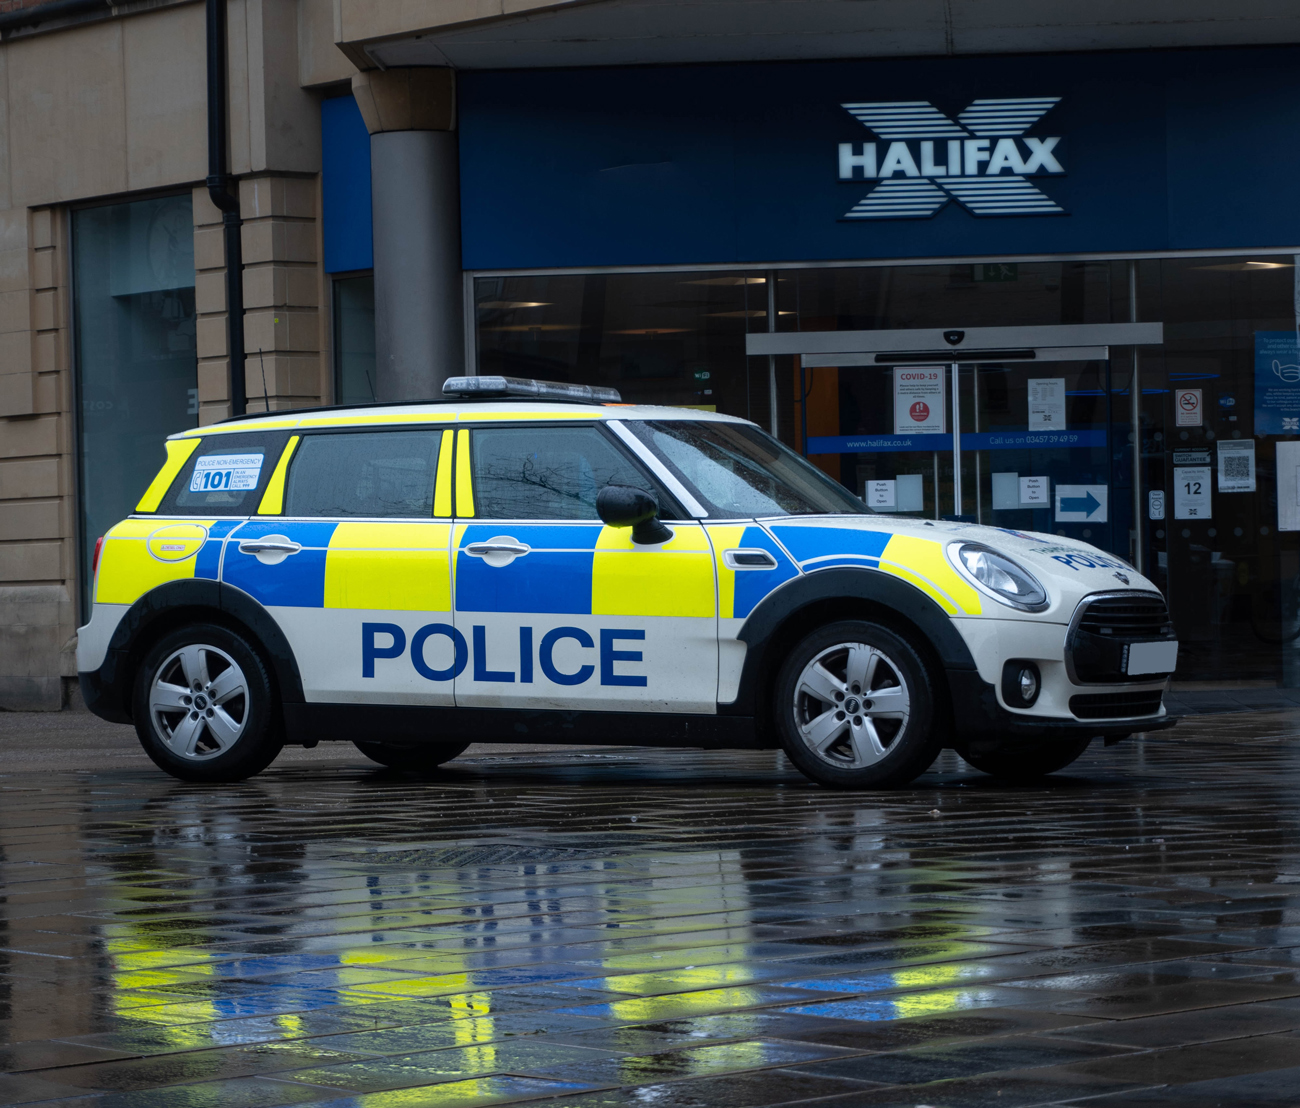 A police car parked on a pavement in-front of a bank